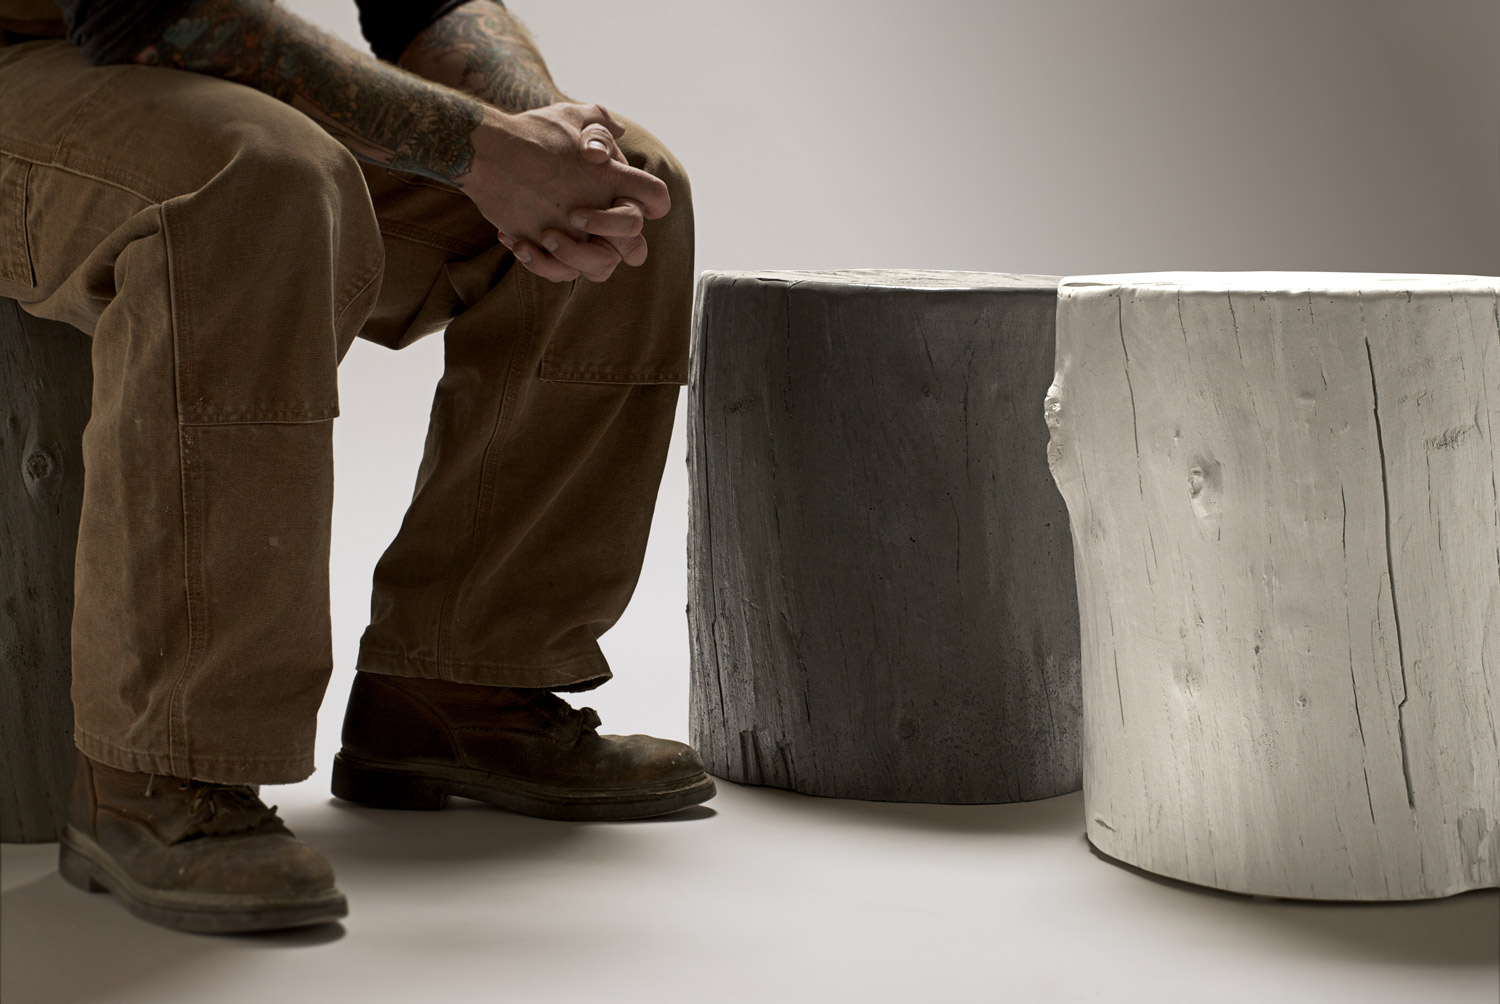 Hard Goods Concrete Knotty Stool, a Concrete Tree Stump Stool that'll Last Forever